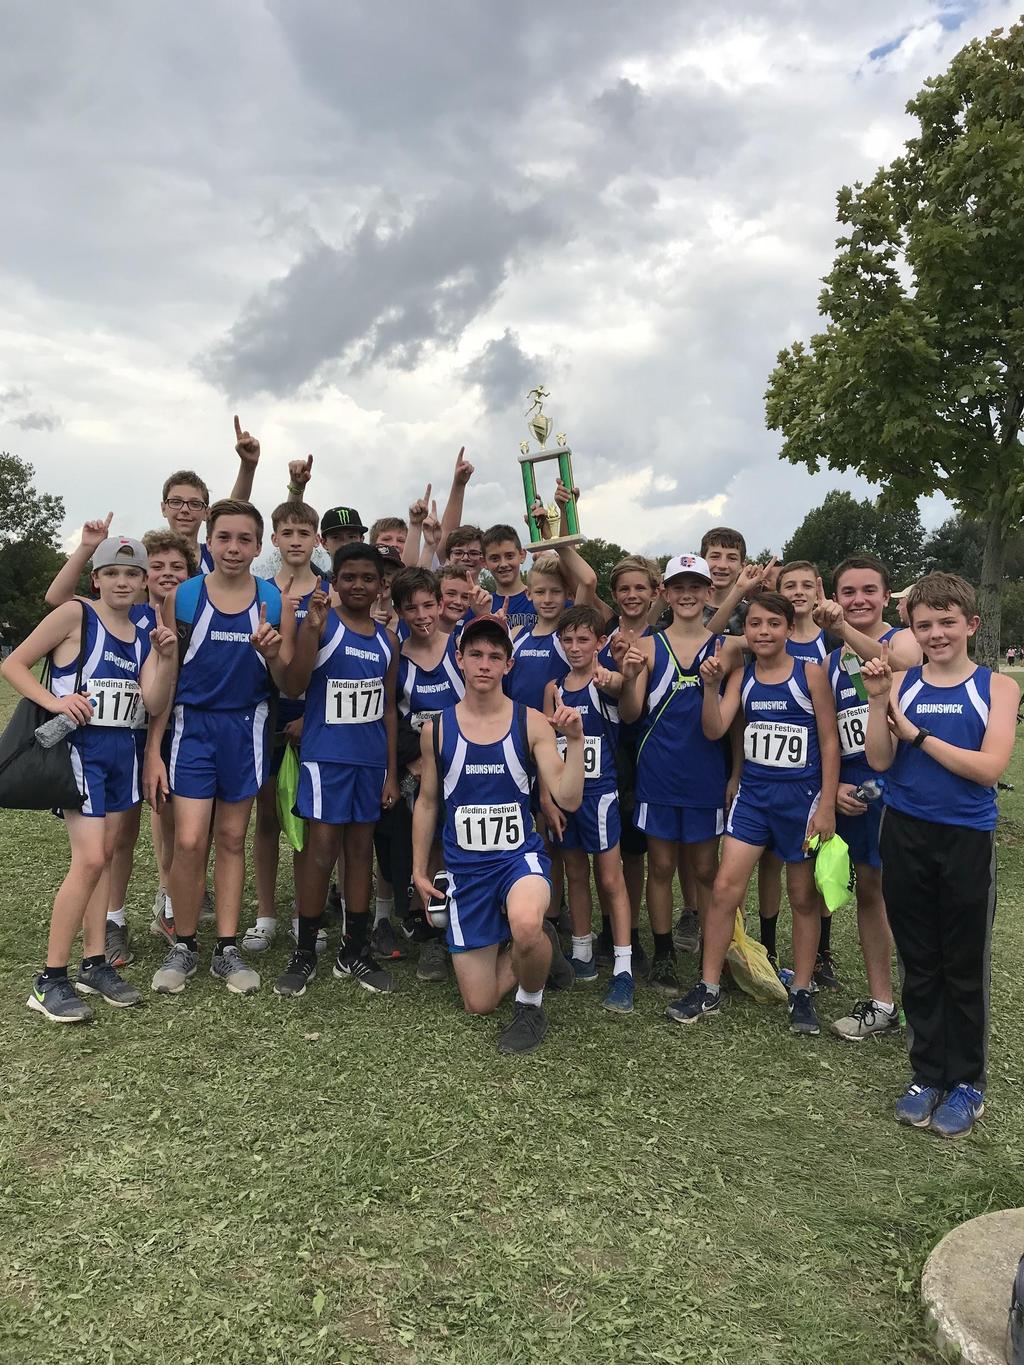 Boys Cross Country Good Luck to the Boys team as the prepare for the